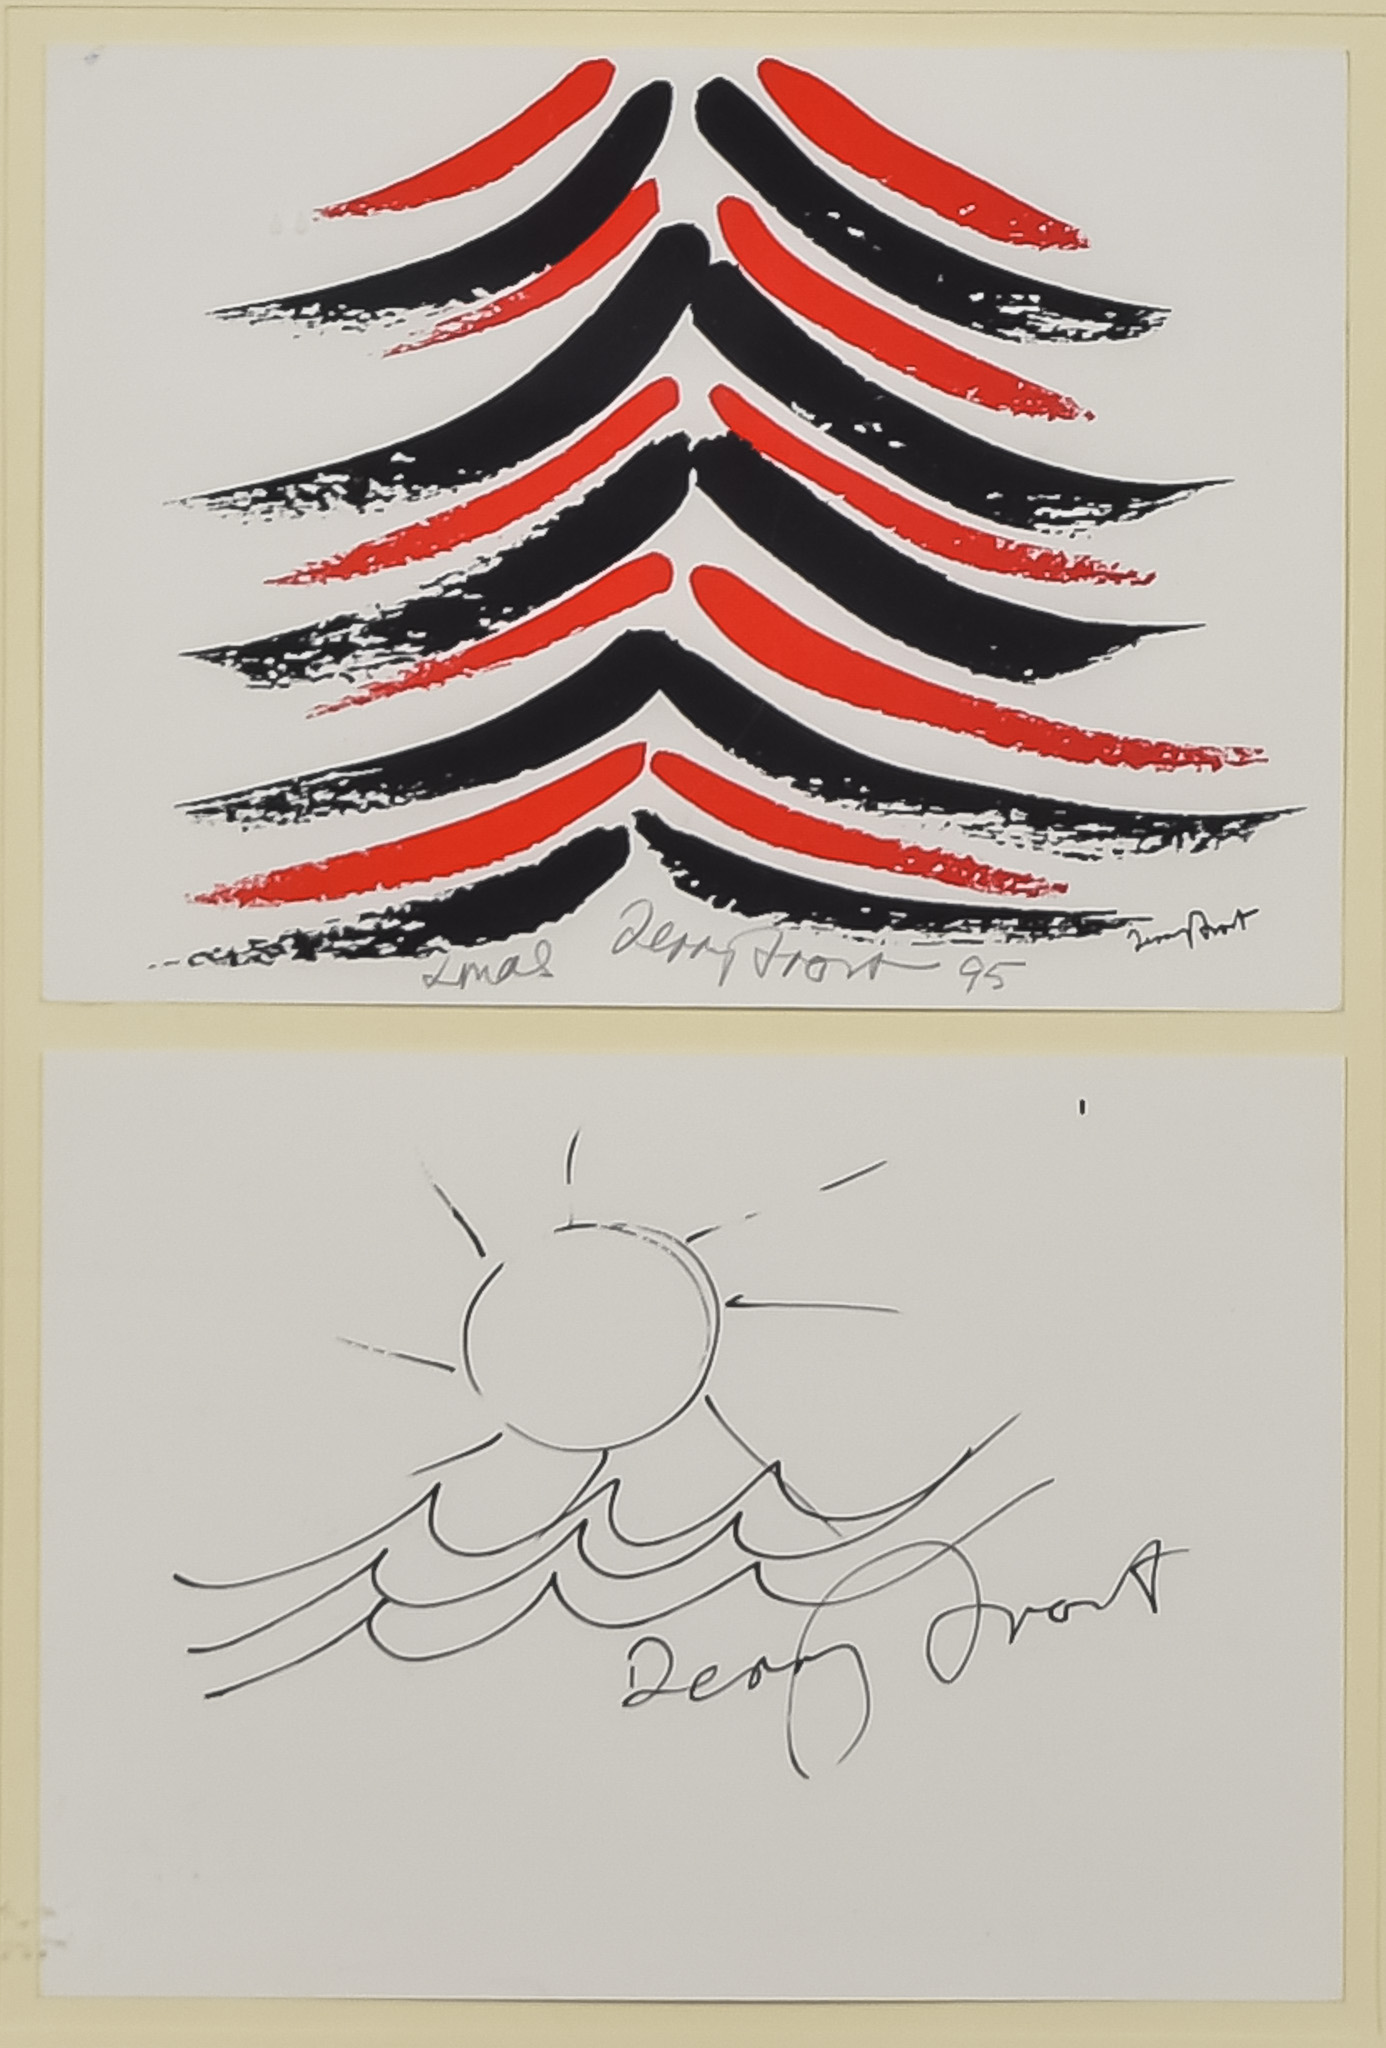 ***Terry Frost (1915-2003) - Red and black print - Christmas tree design, signed in pencil and dated